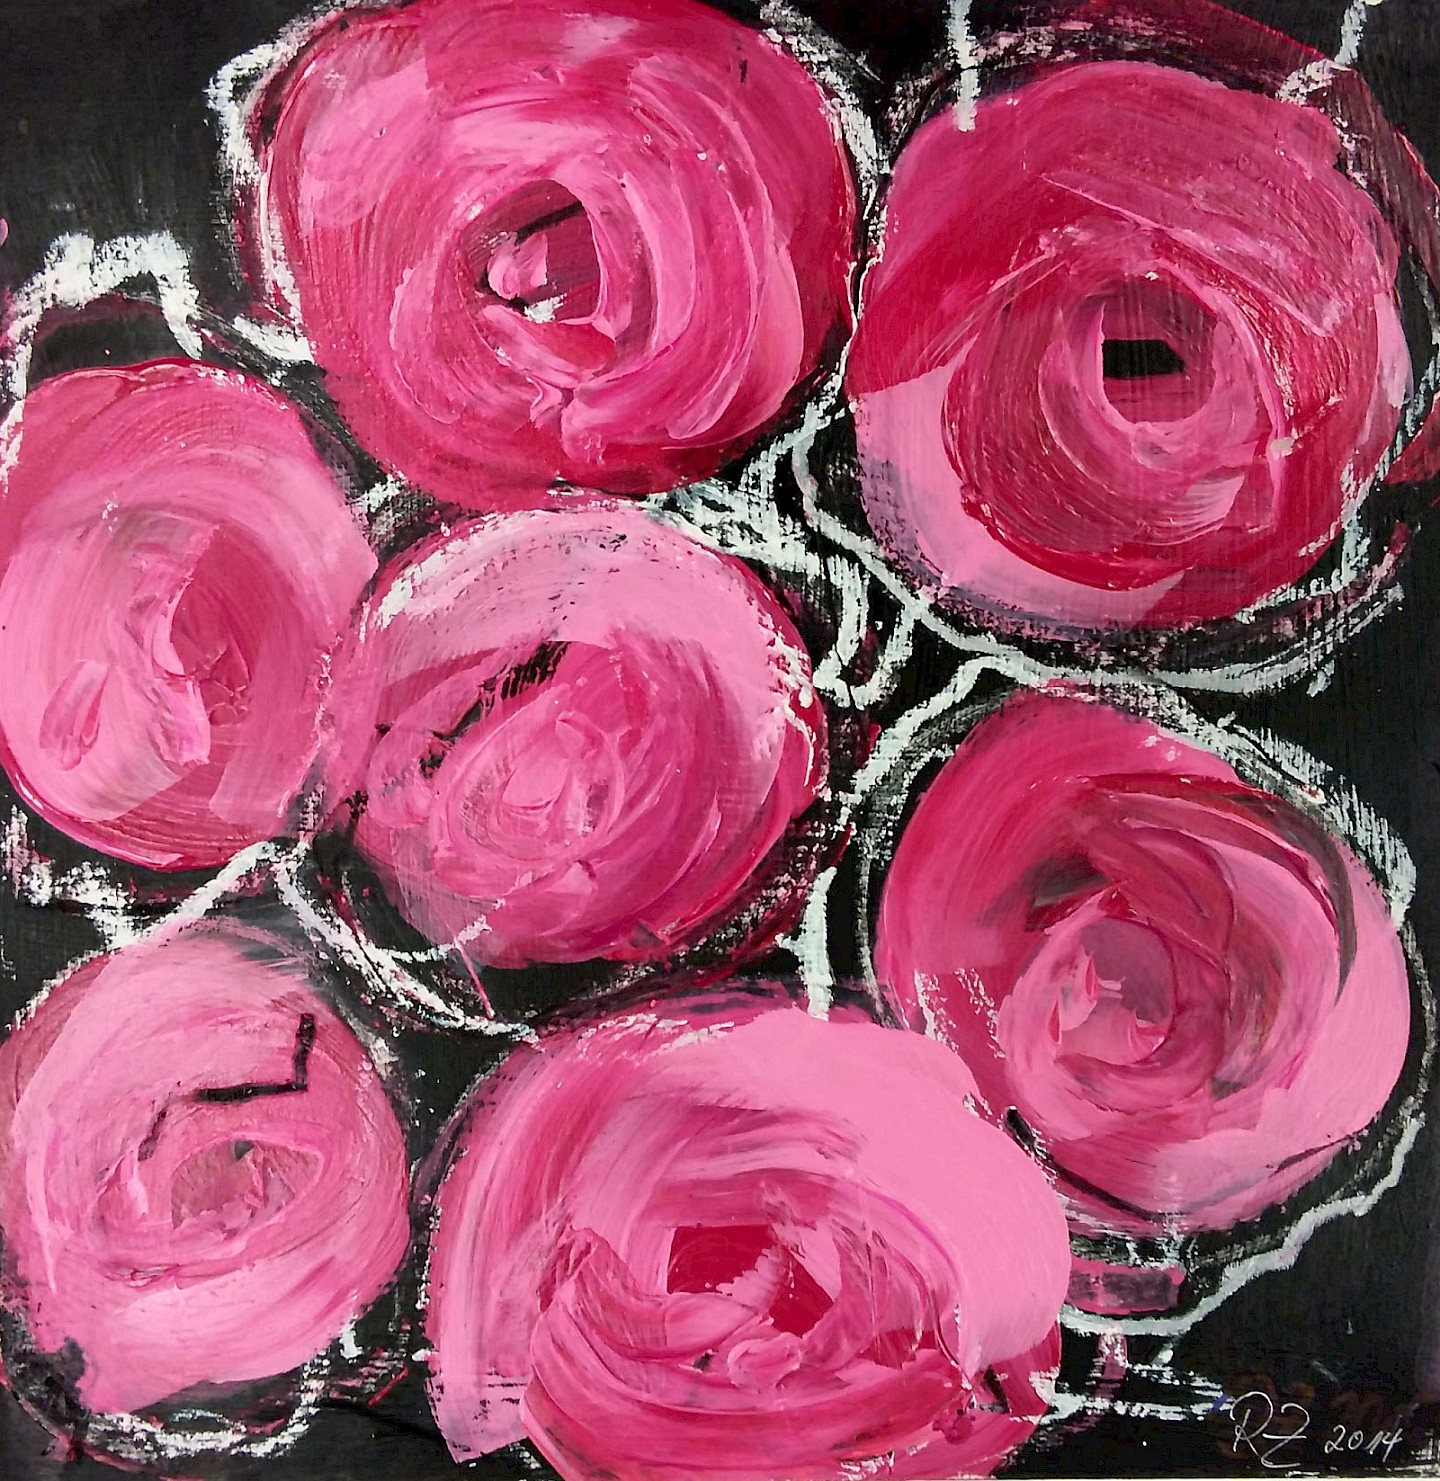 Rose study (1) painted on canvas 40x40 / acrylic and pastel chalk